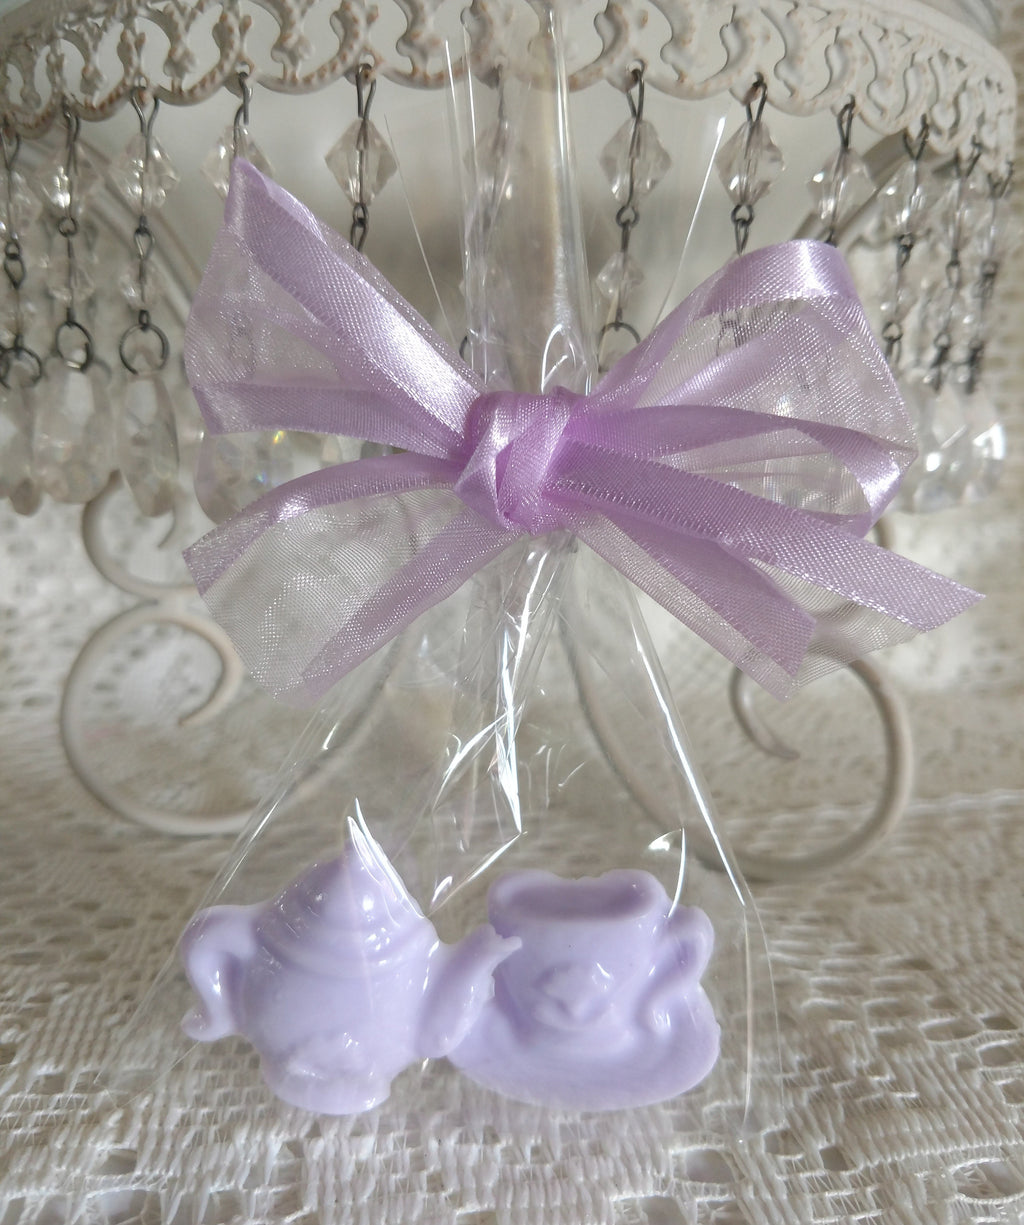 Lovely Lavender Teapot and Teacup Soap Party Favors Set of 8-Roses And Teacups